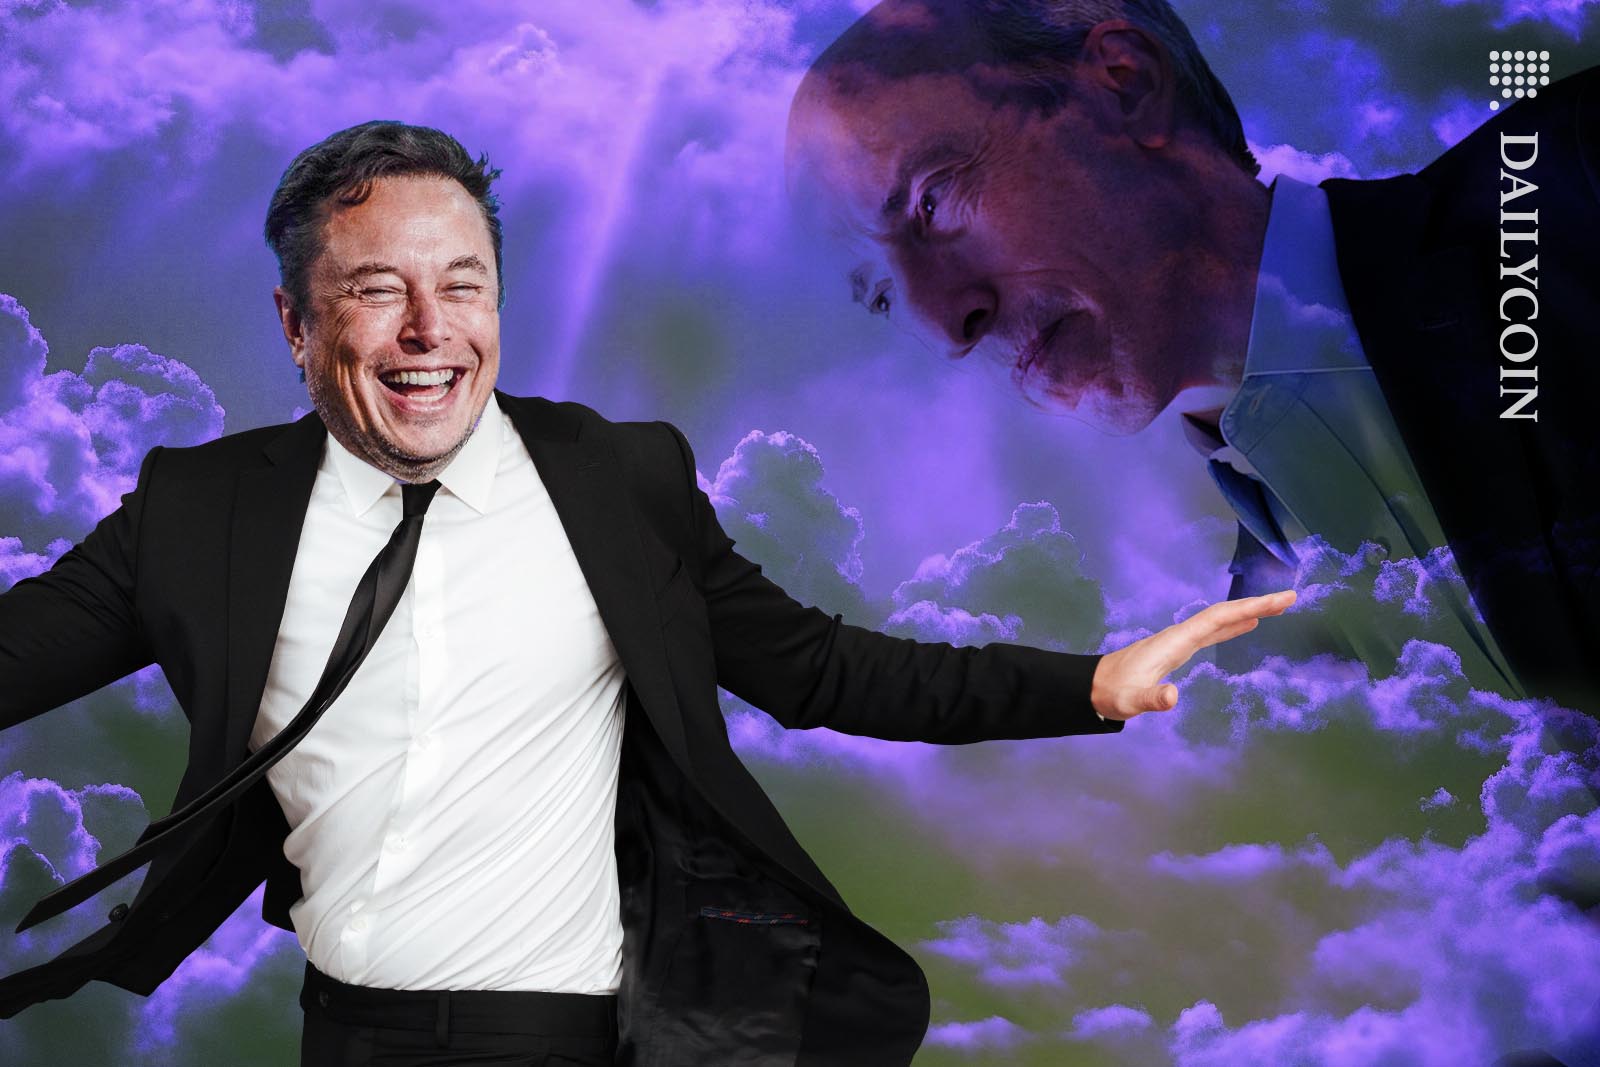 Elon Musk laughing as Gary Gensler looking over him angry in the clouds.